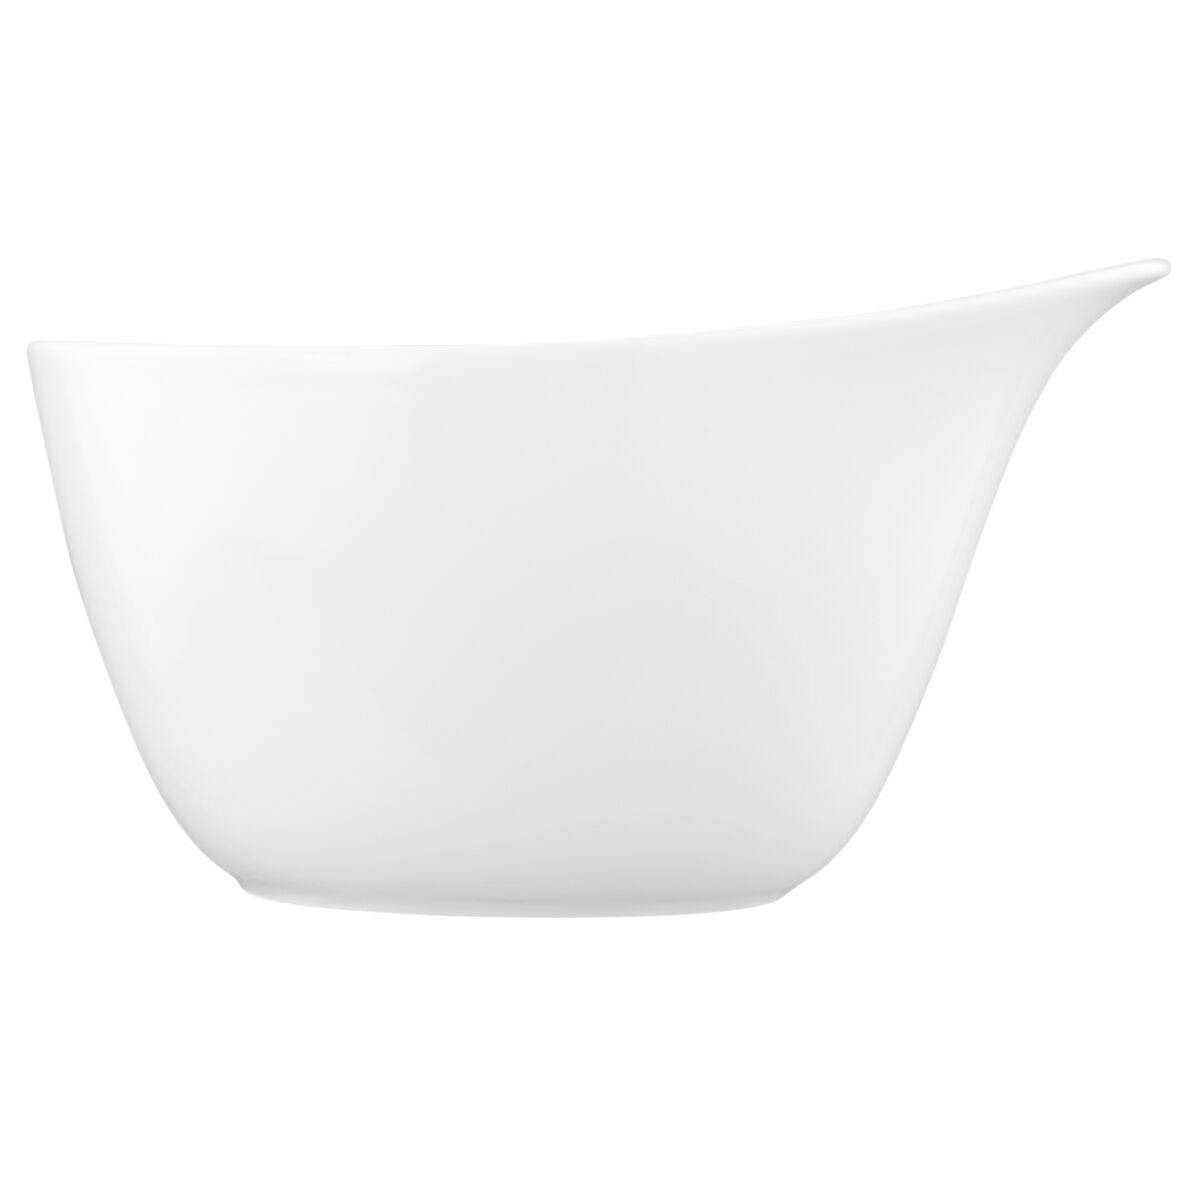 (2 pieces) Seltmann Weiden - Cereal bowl with handle - 0.6 liters